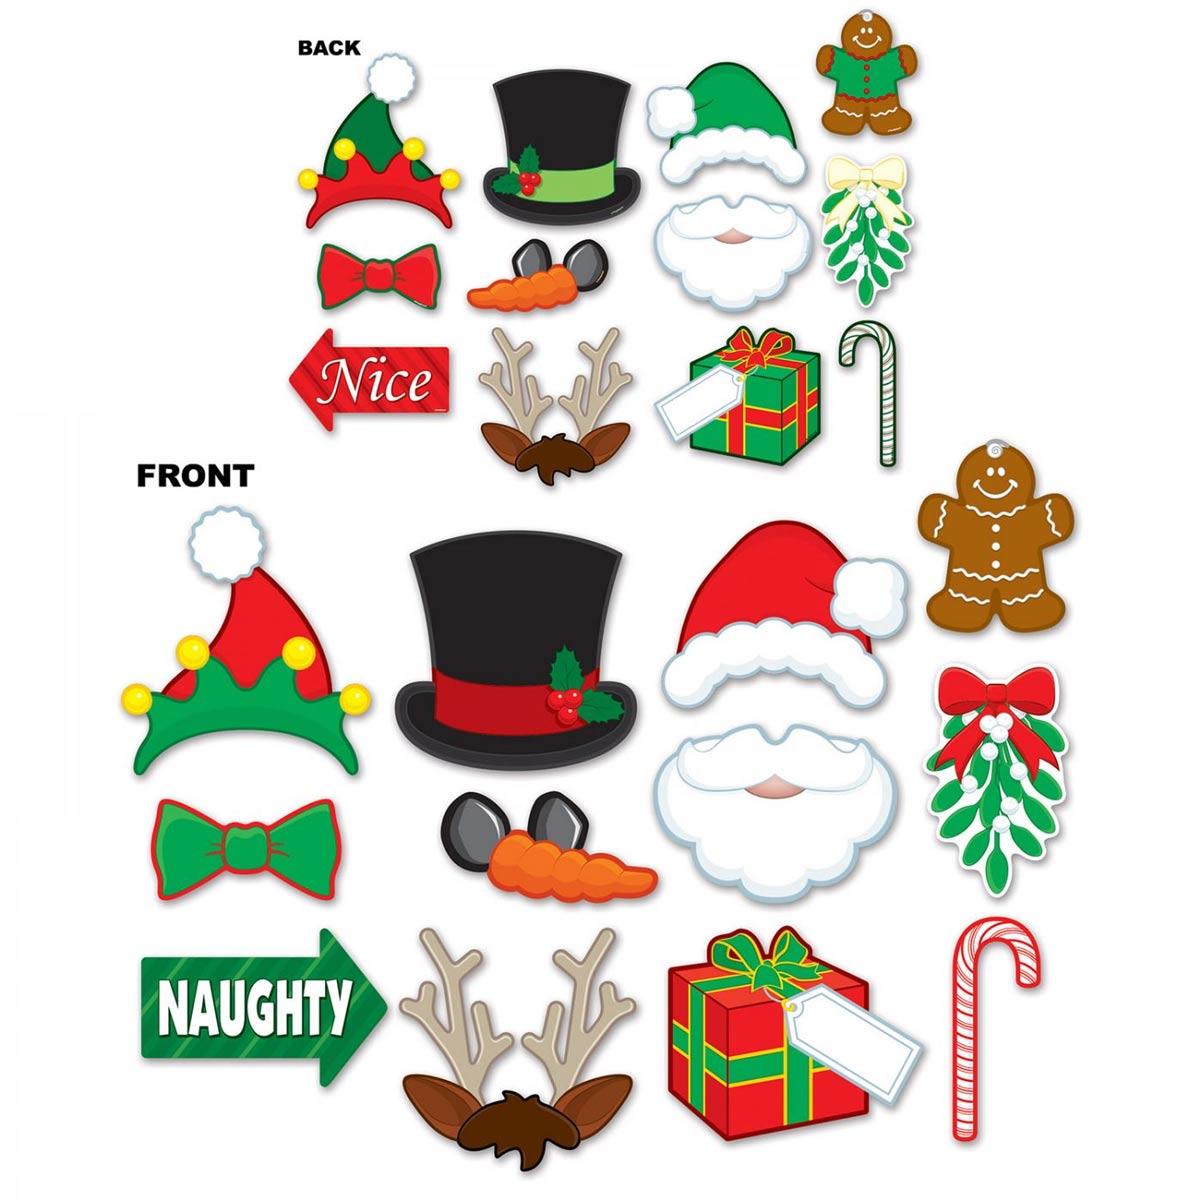 Christmas Photo Booth Fun Signs pack 12 printed both sides - 24 designs total. By Beistle 20166 and available in the UK here at Karnival Costumes online Christmas party shop